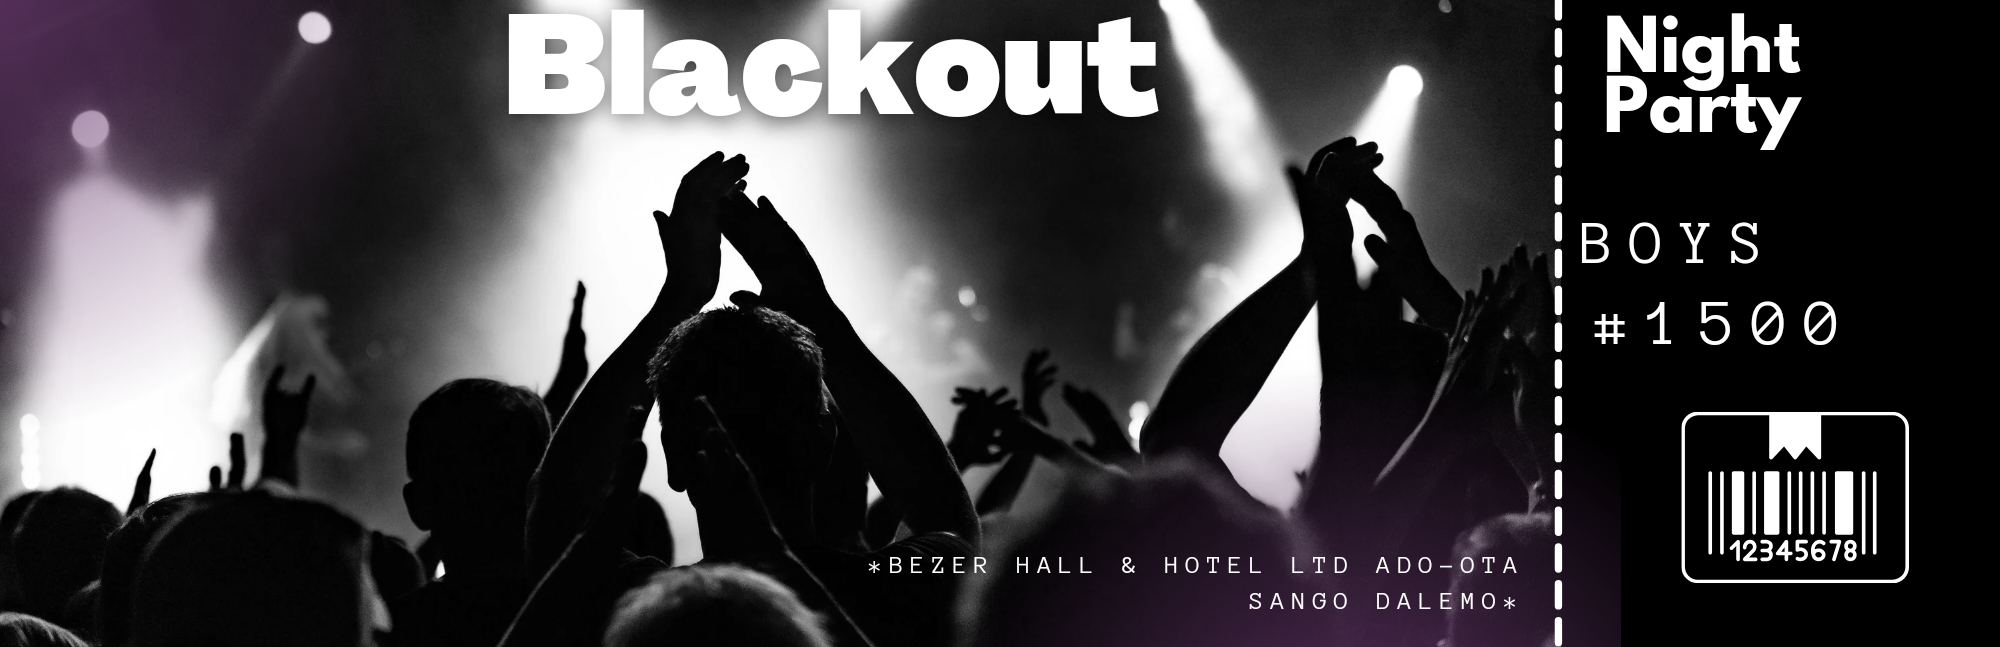 Blackout 1.0 Post free event in Nigeria using tickethub.ng, buy and sell tickets to event